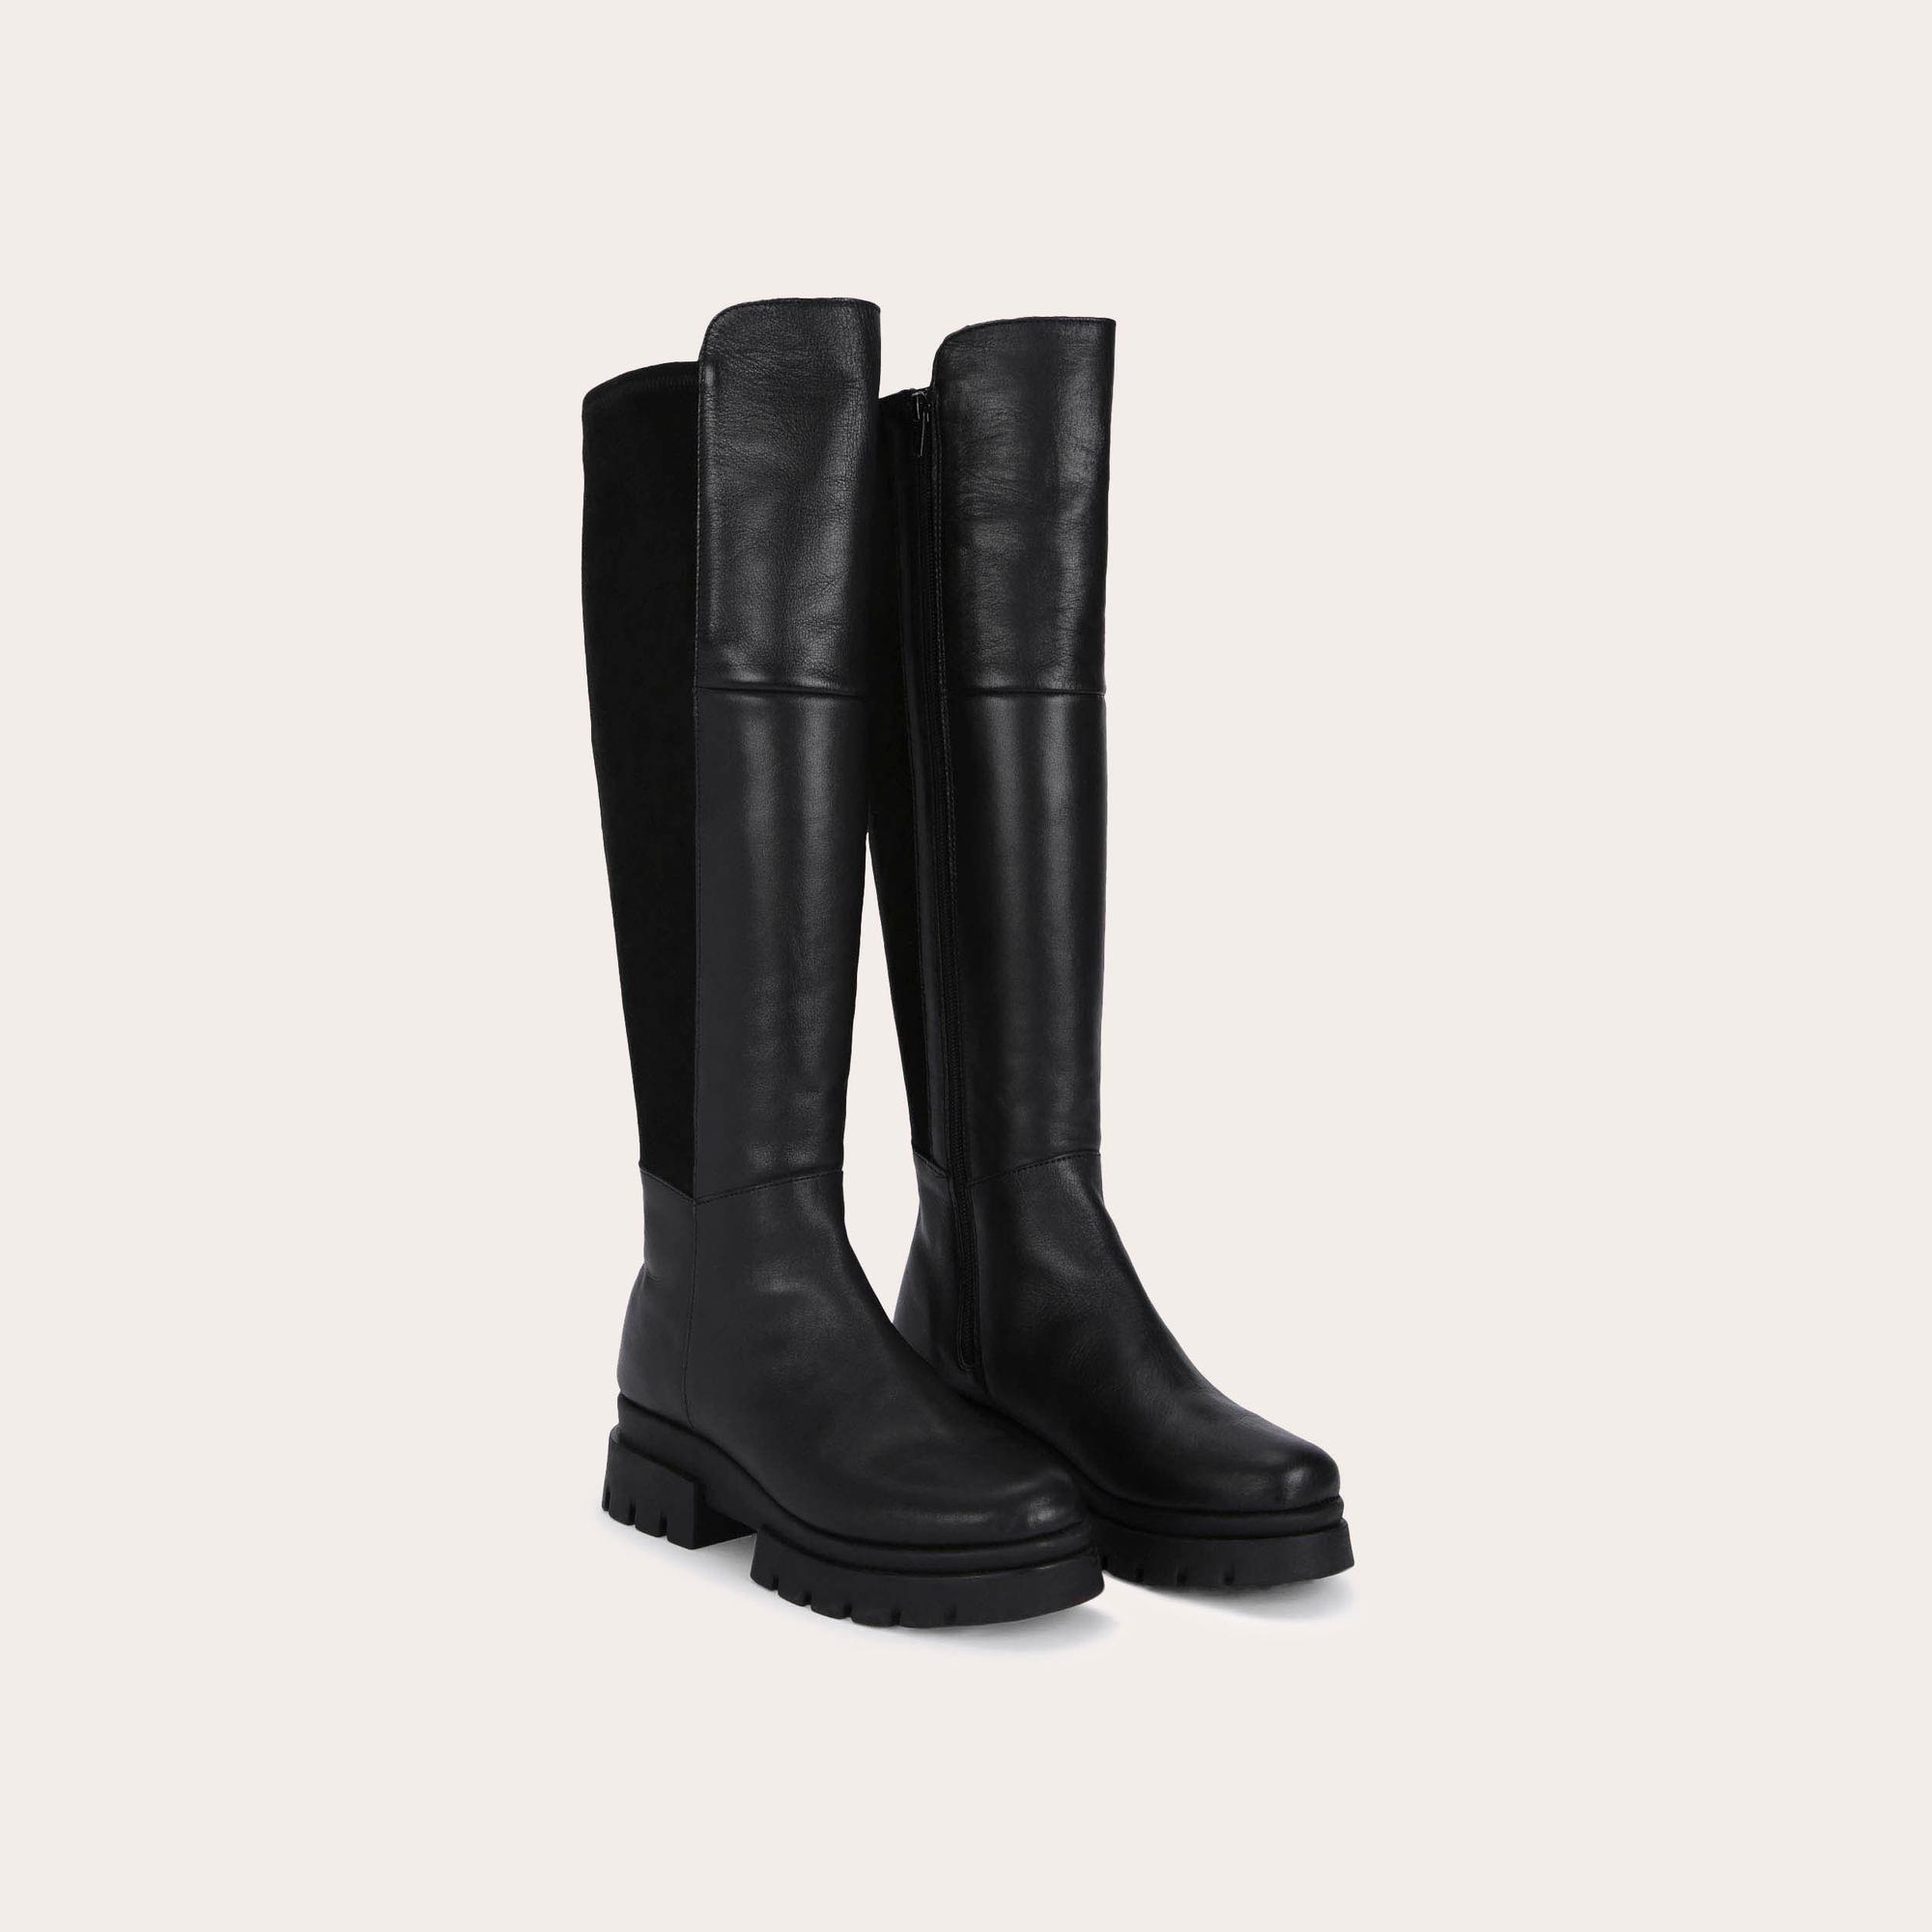 RUN 50/50 KNEE BOOT Black Leather Knee Boots by CARVELA COMFORT